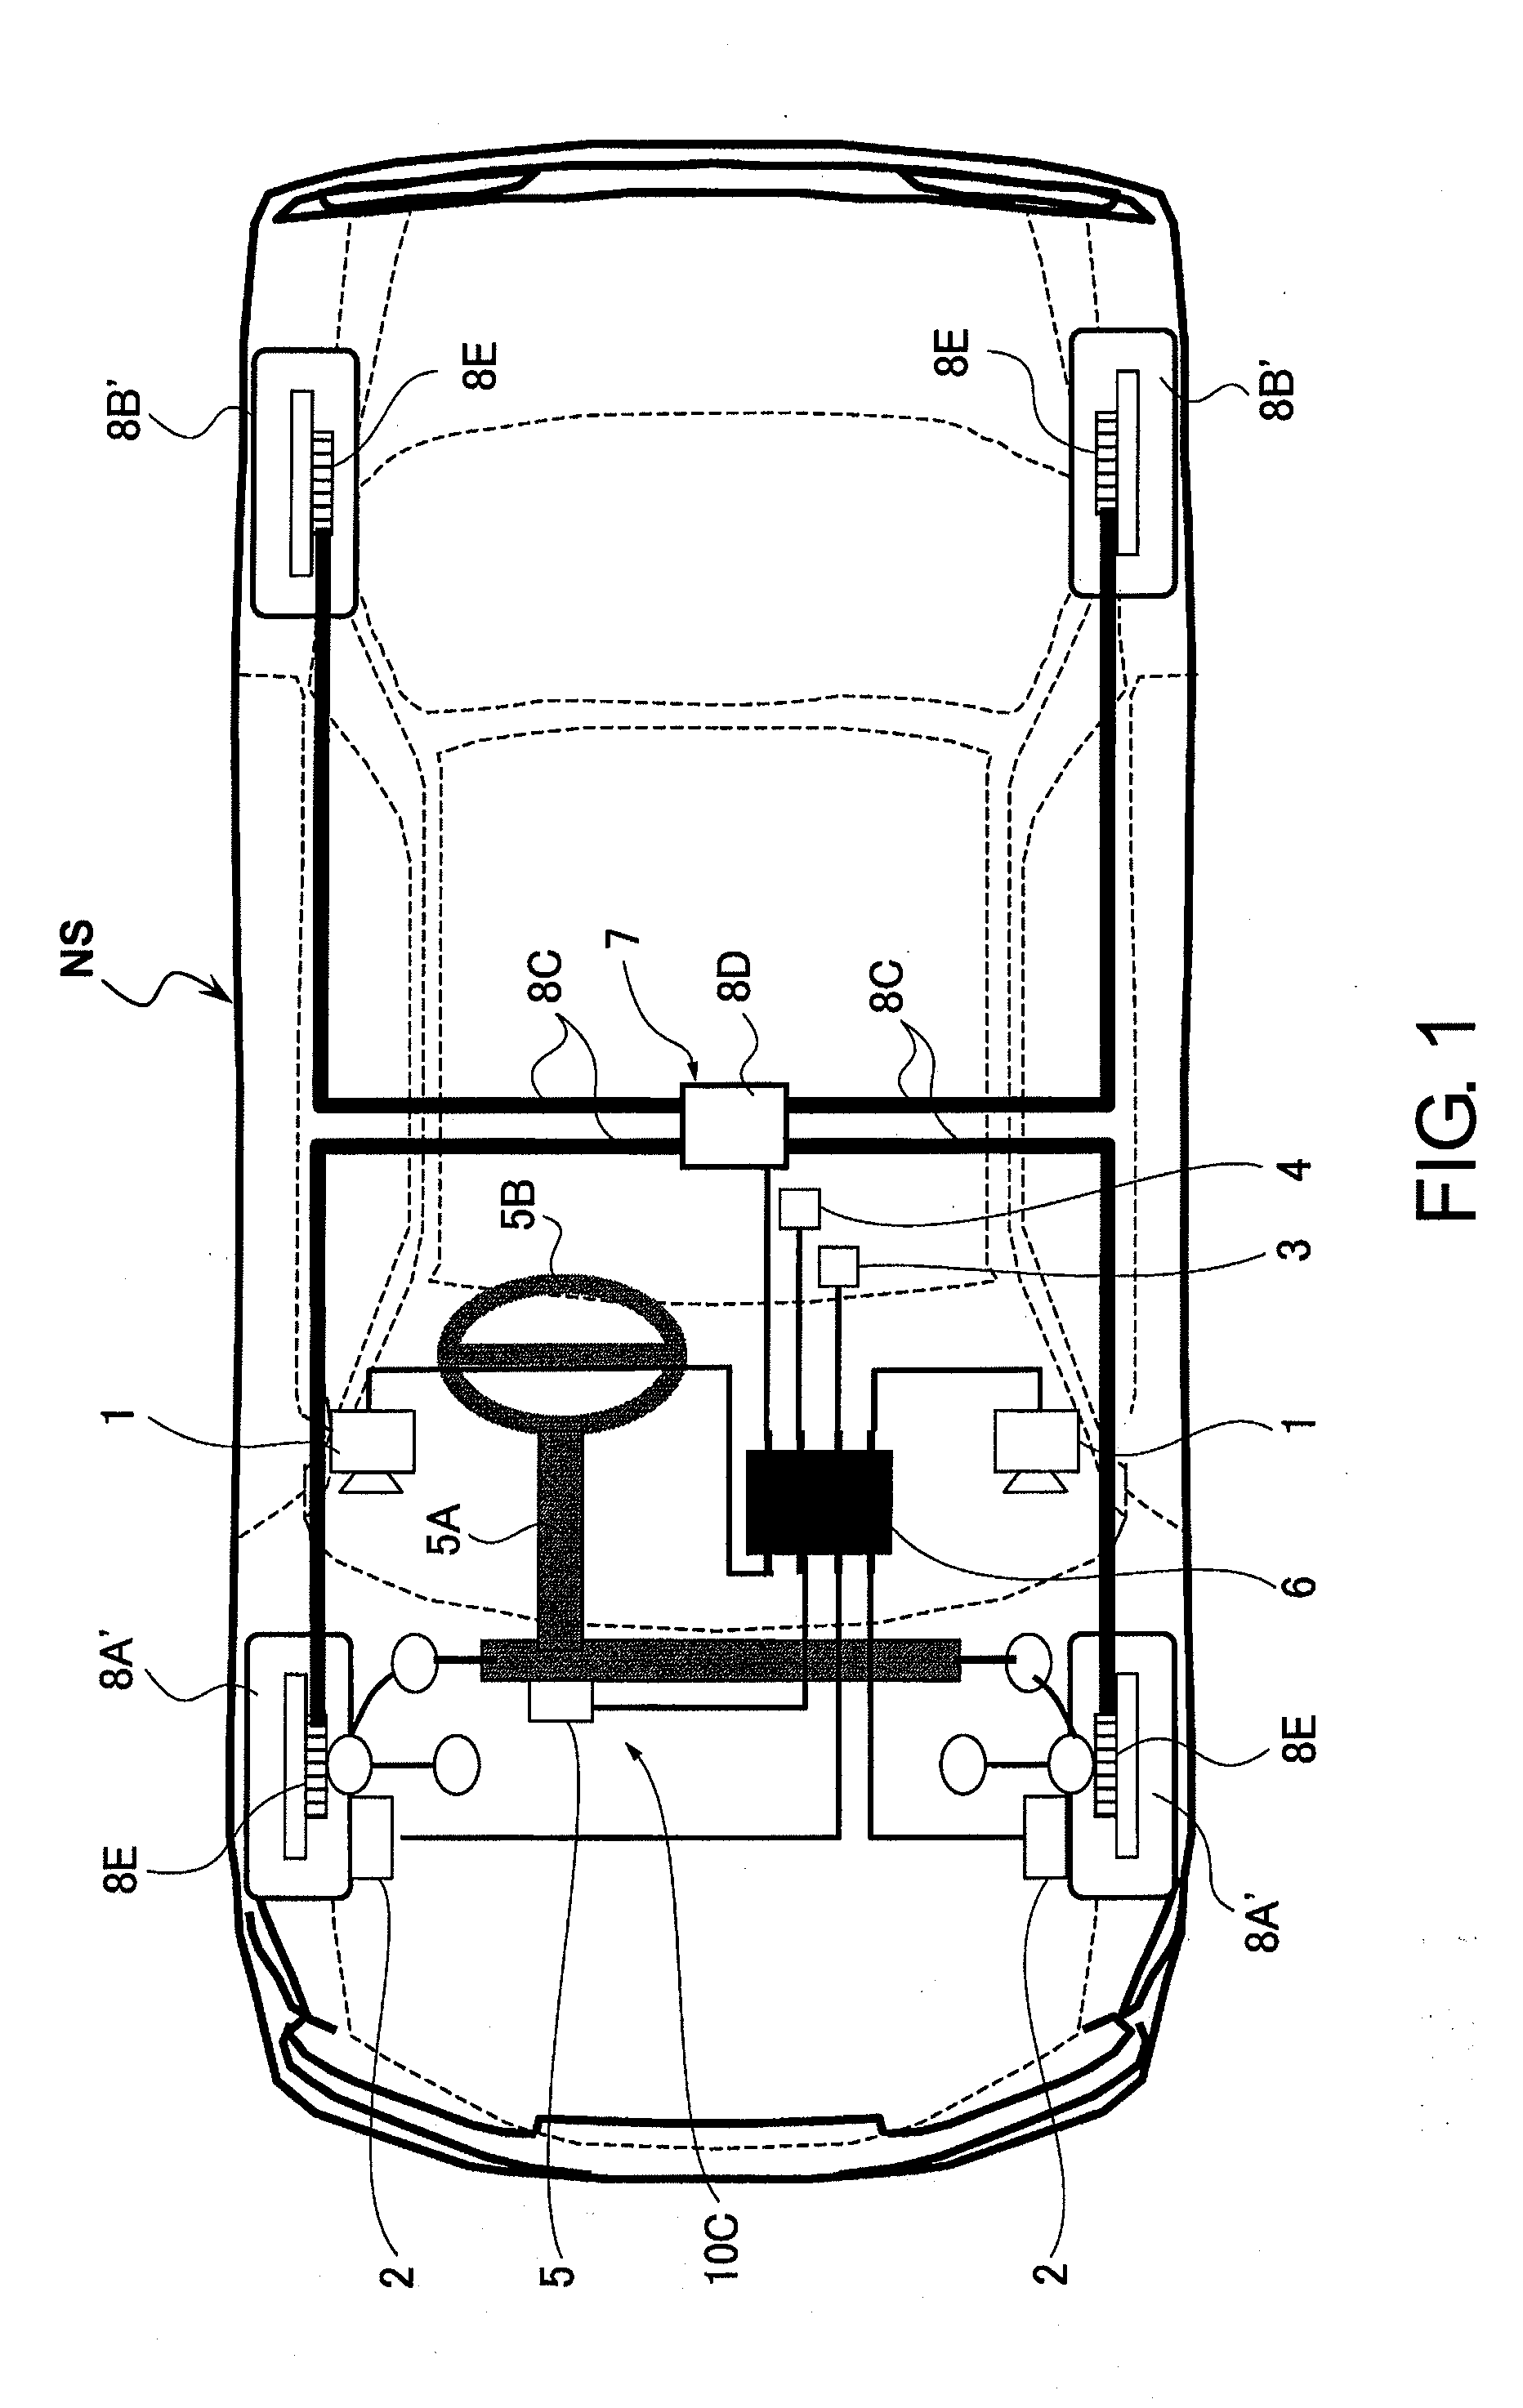 Vehicle brake control system and method